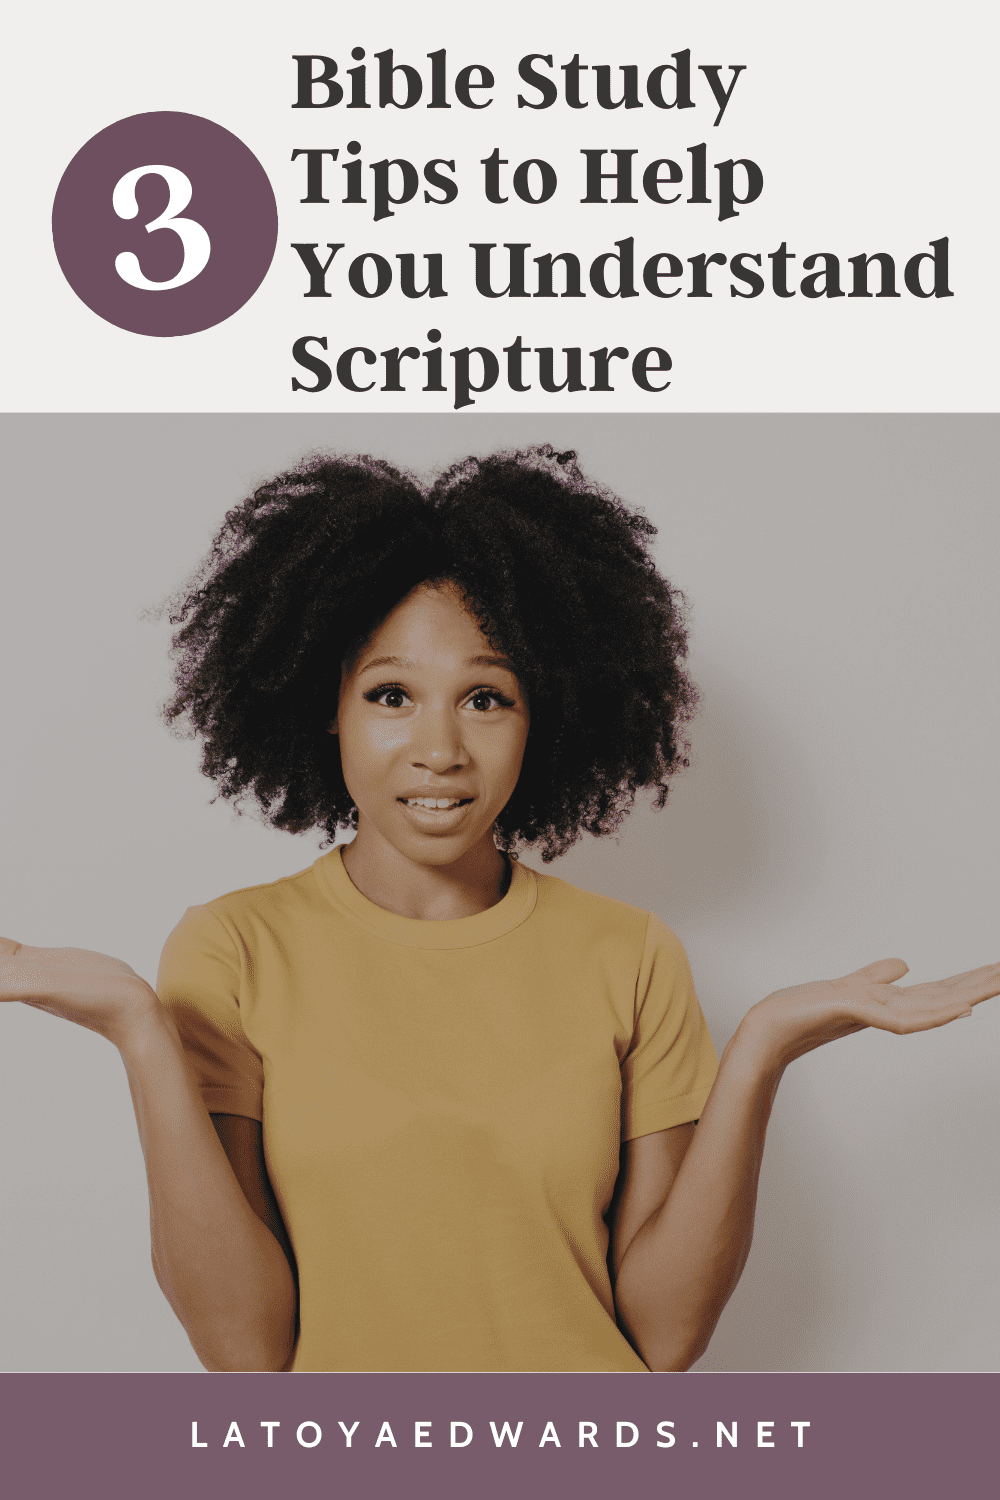 If you are struggling to understand scripture or retain biblical truths when you sit down for bible study these tips will help you. Learn how to troubleshoot your current bible study routine plus get suggestions on things to change.